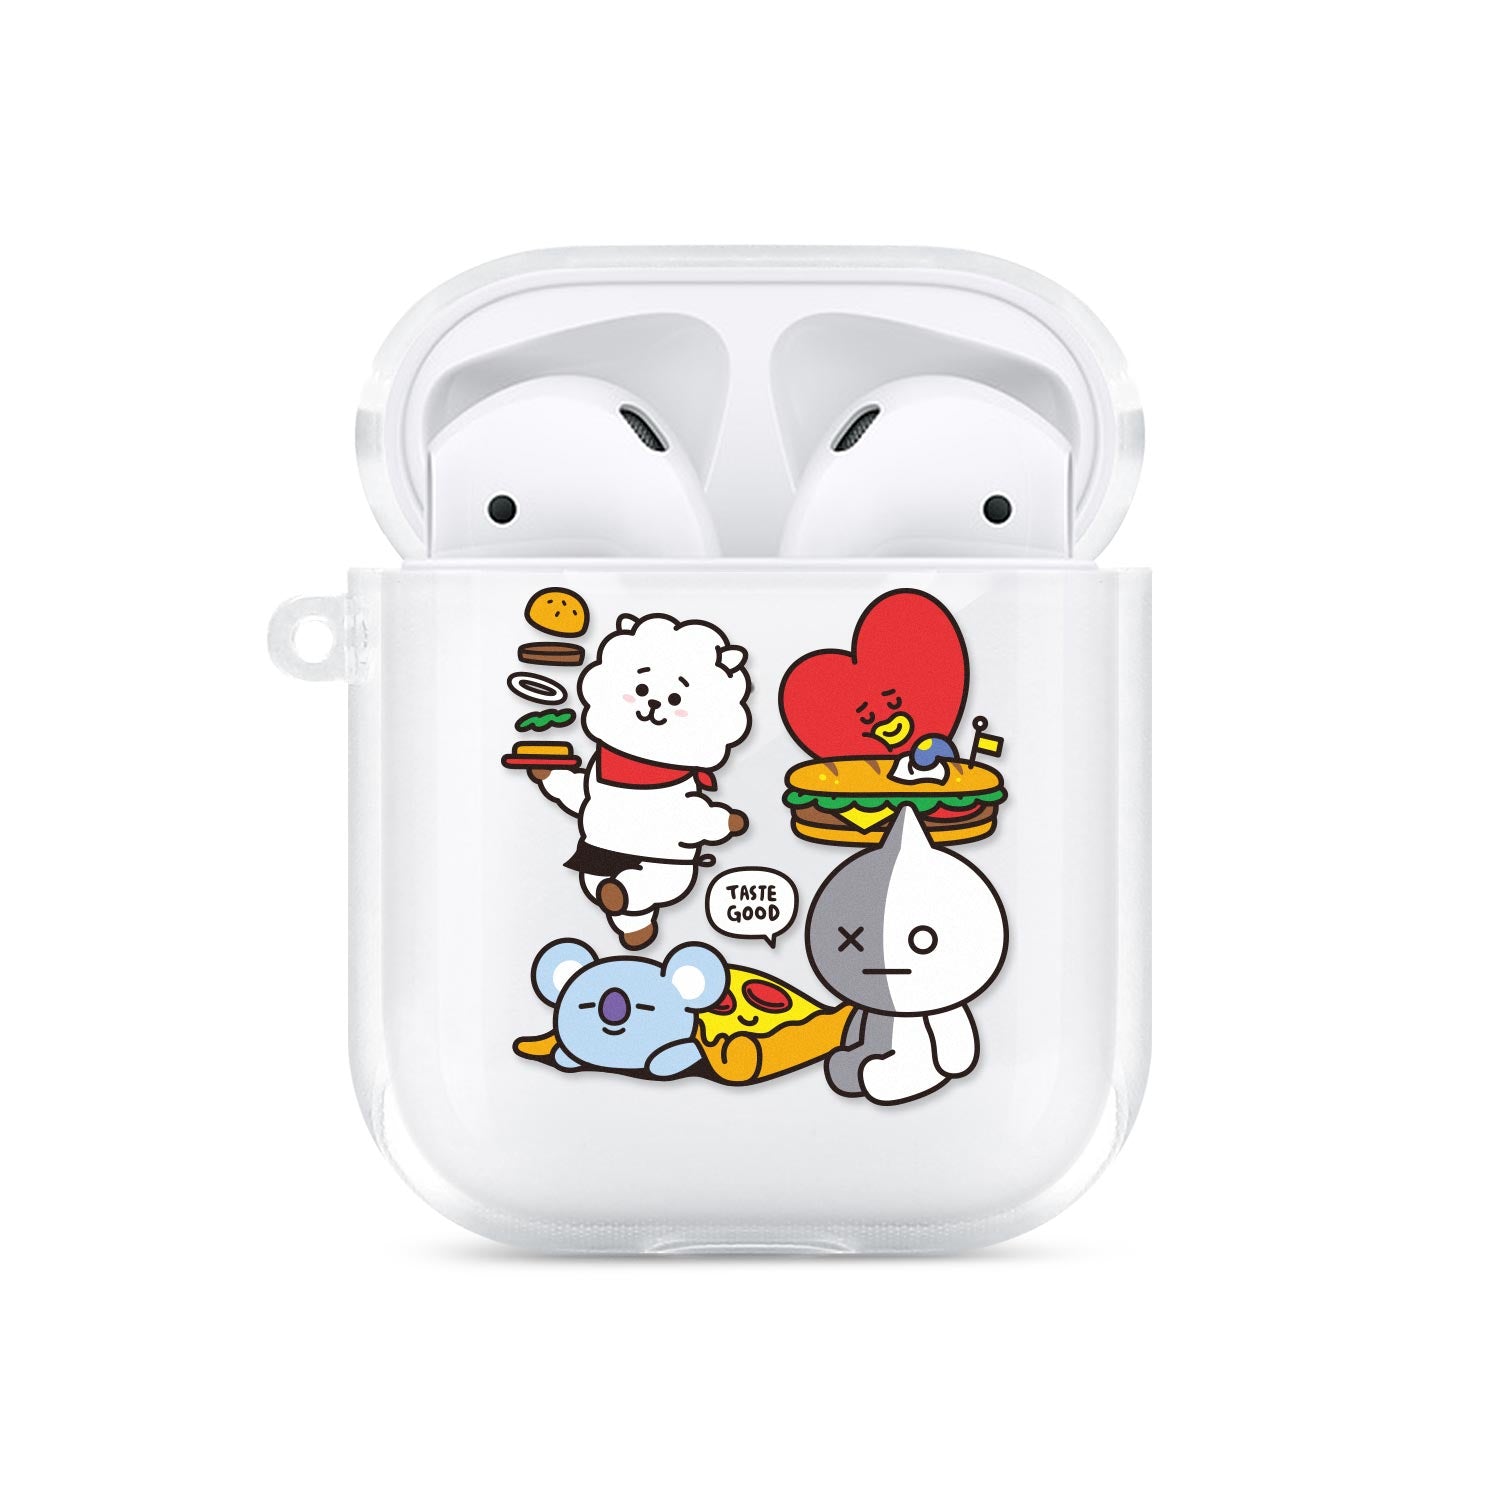 Airpod Case Cover for Apple Airpods 2&1 Charging Ghana